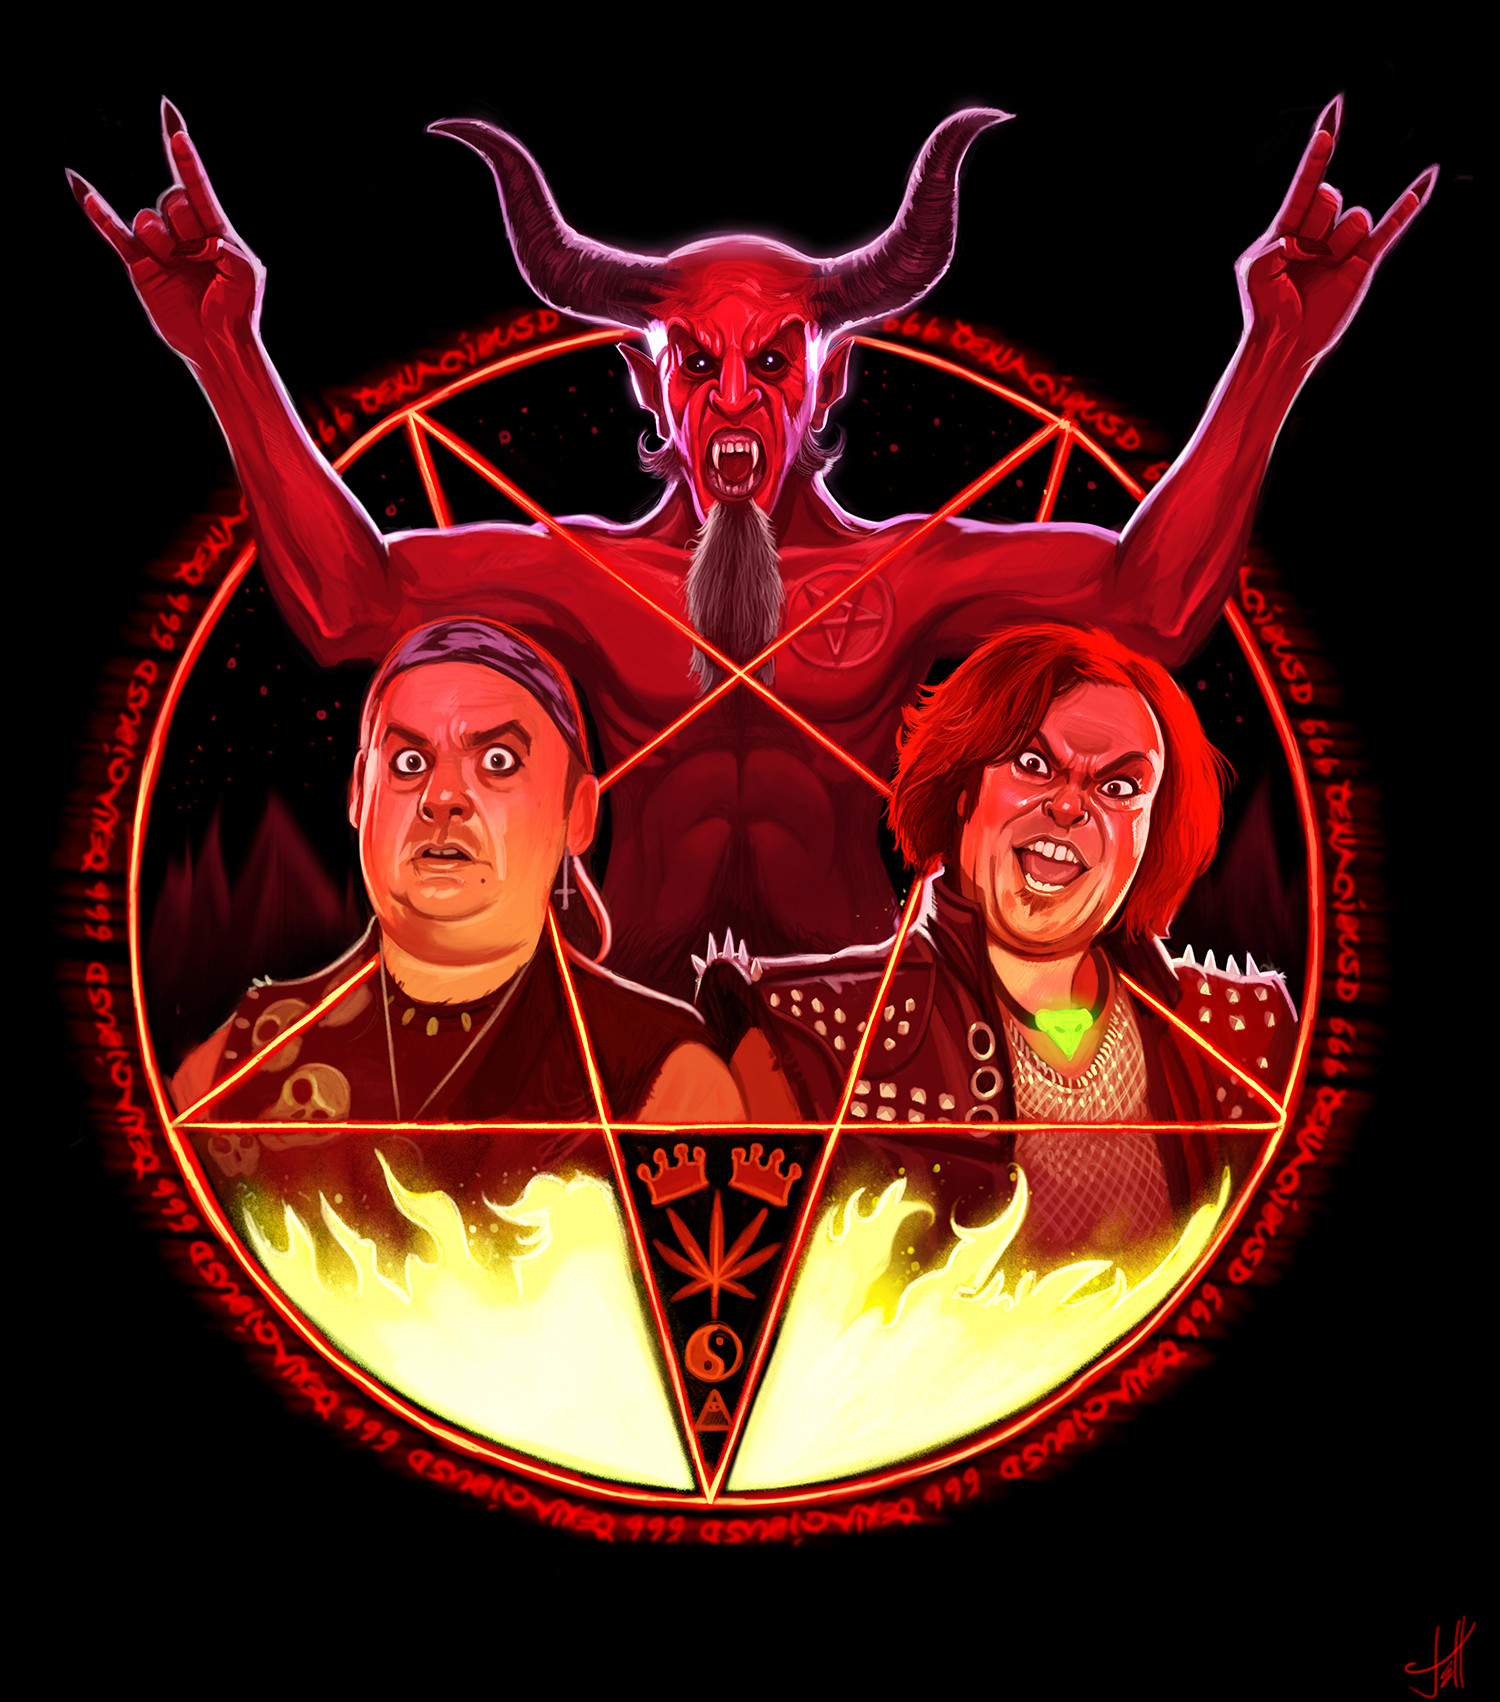 Tenacious D In The Pick Of Destiny Backgrounds, Compatible - PC, Mobile, Gadgets| 1500x1702 px